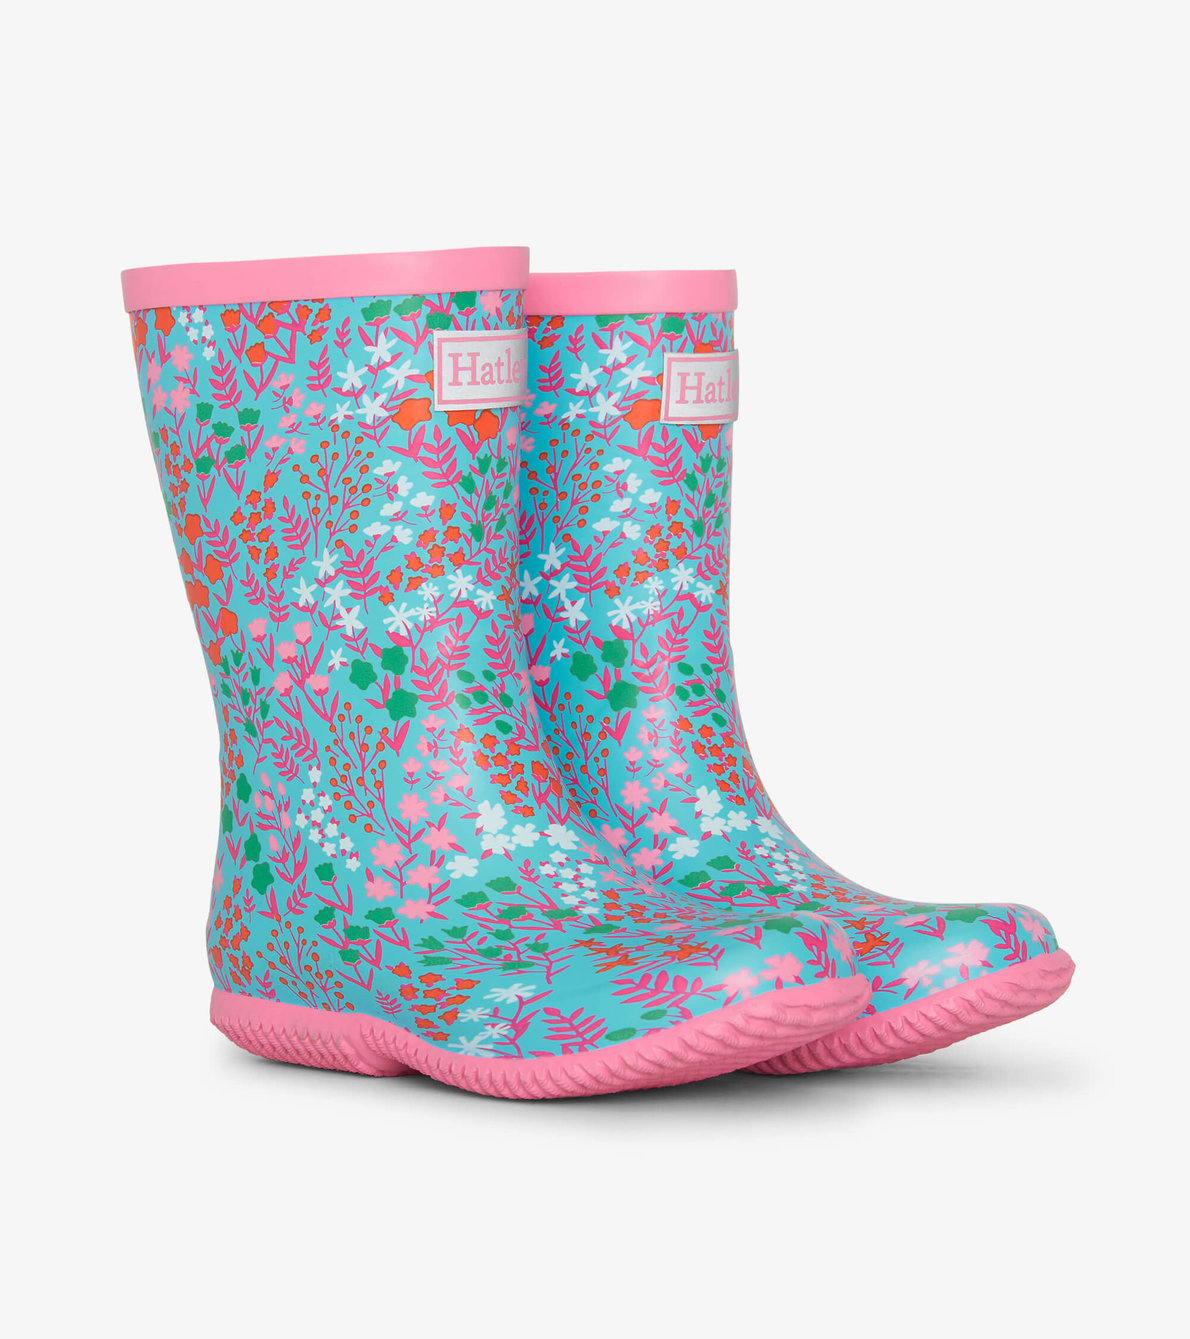 View larger image of Girls Ditsy Floral Packable Rain Boots